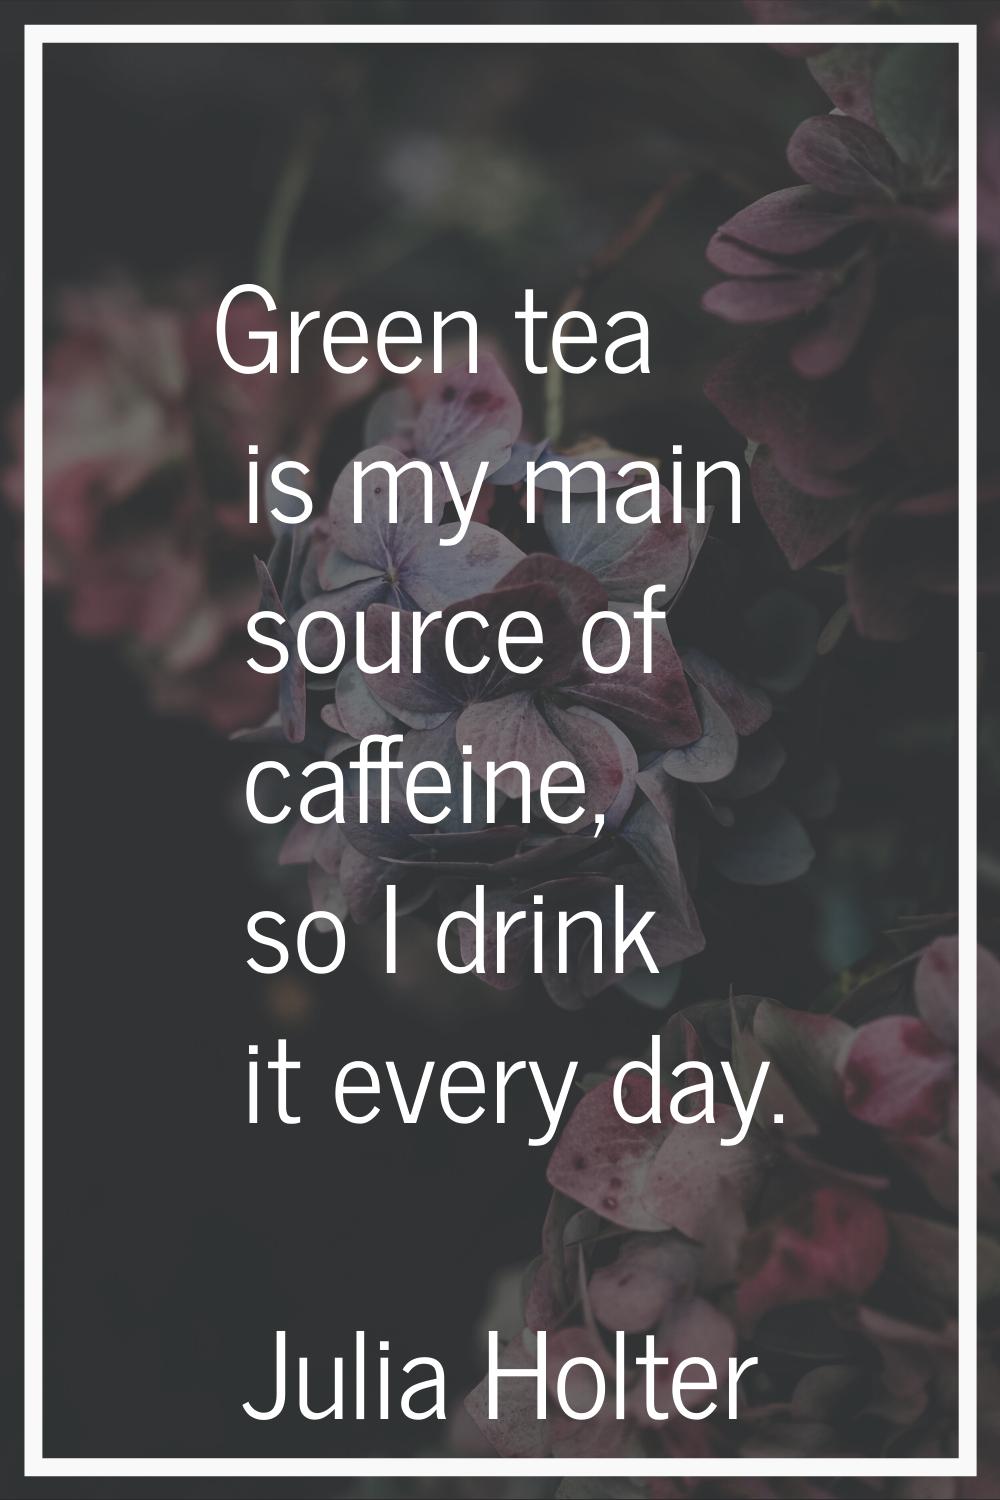 Green tea is my main source of caffeine, so I drink it every day.